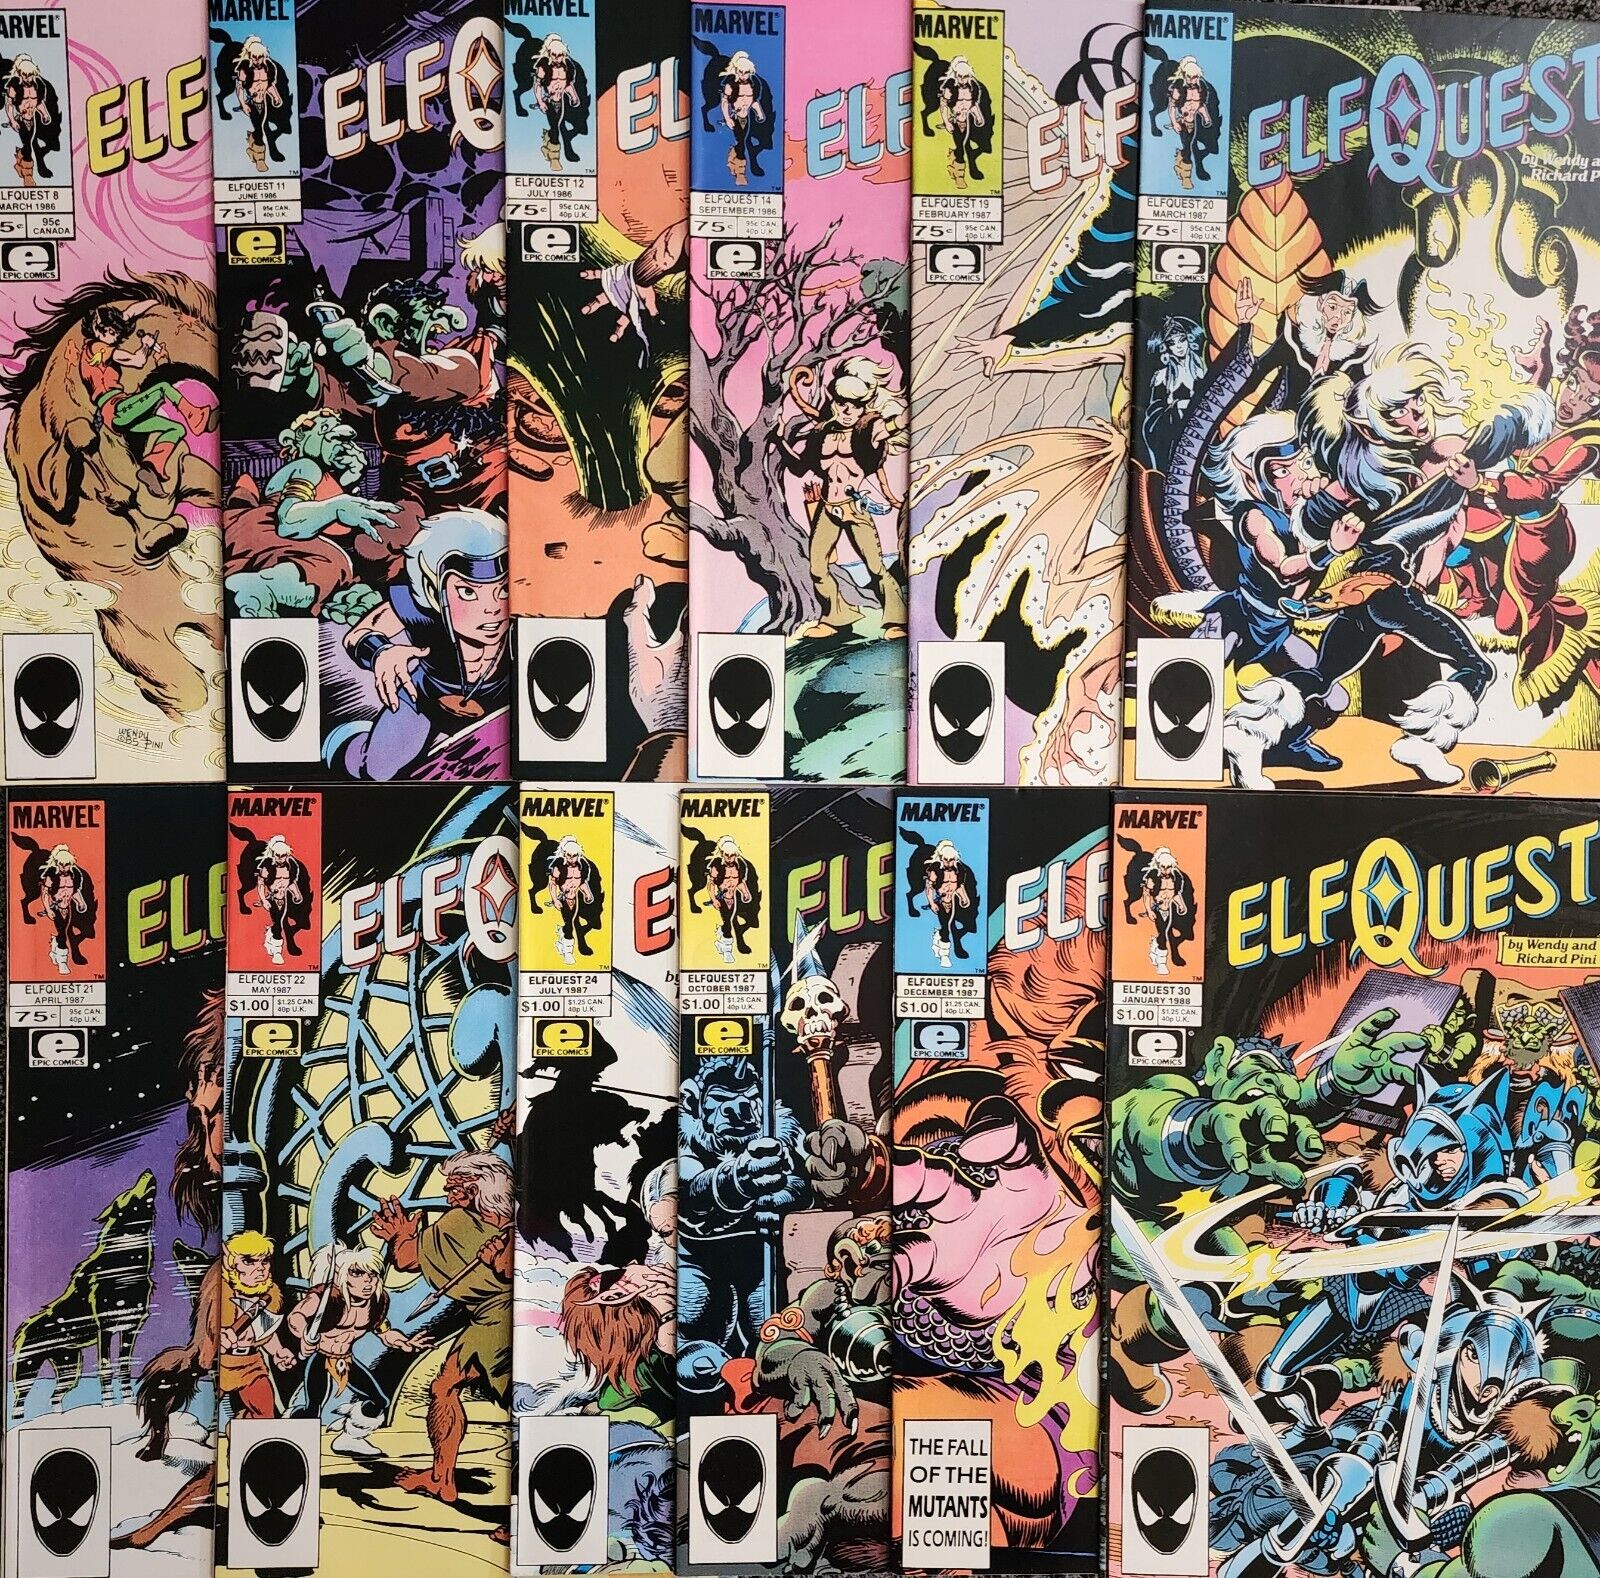 ELF QUEST Issue 8 11 12 14 19-22 24 27 29 30 Epic Marvel Comic Book Lot 1986 KEY